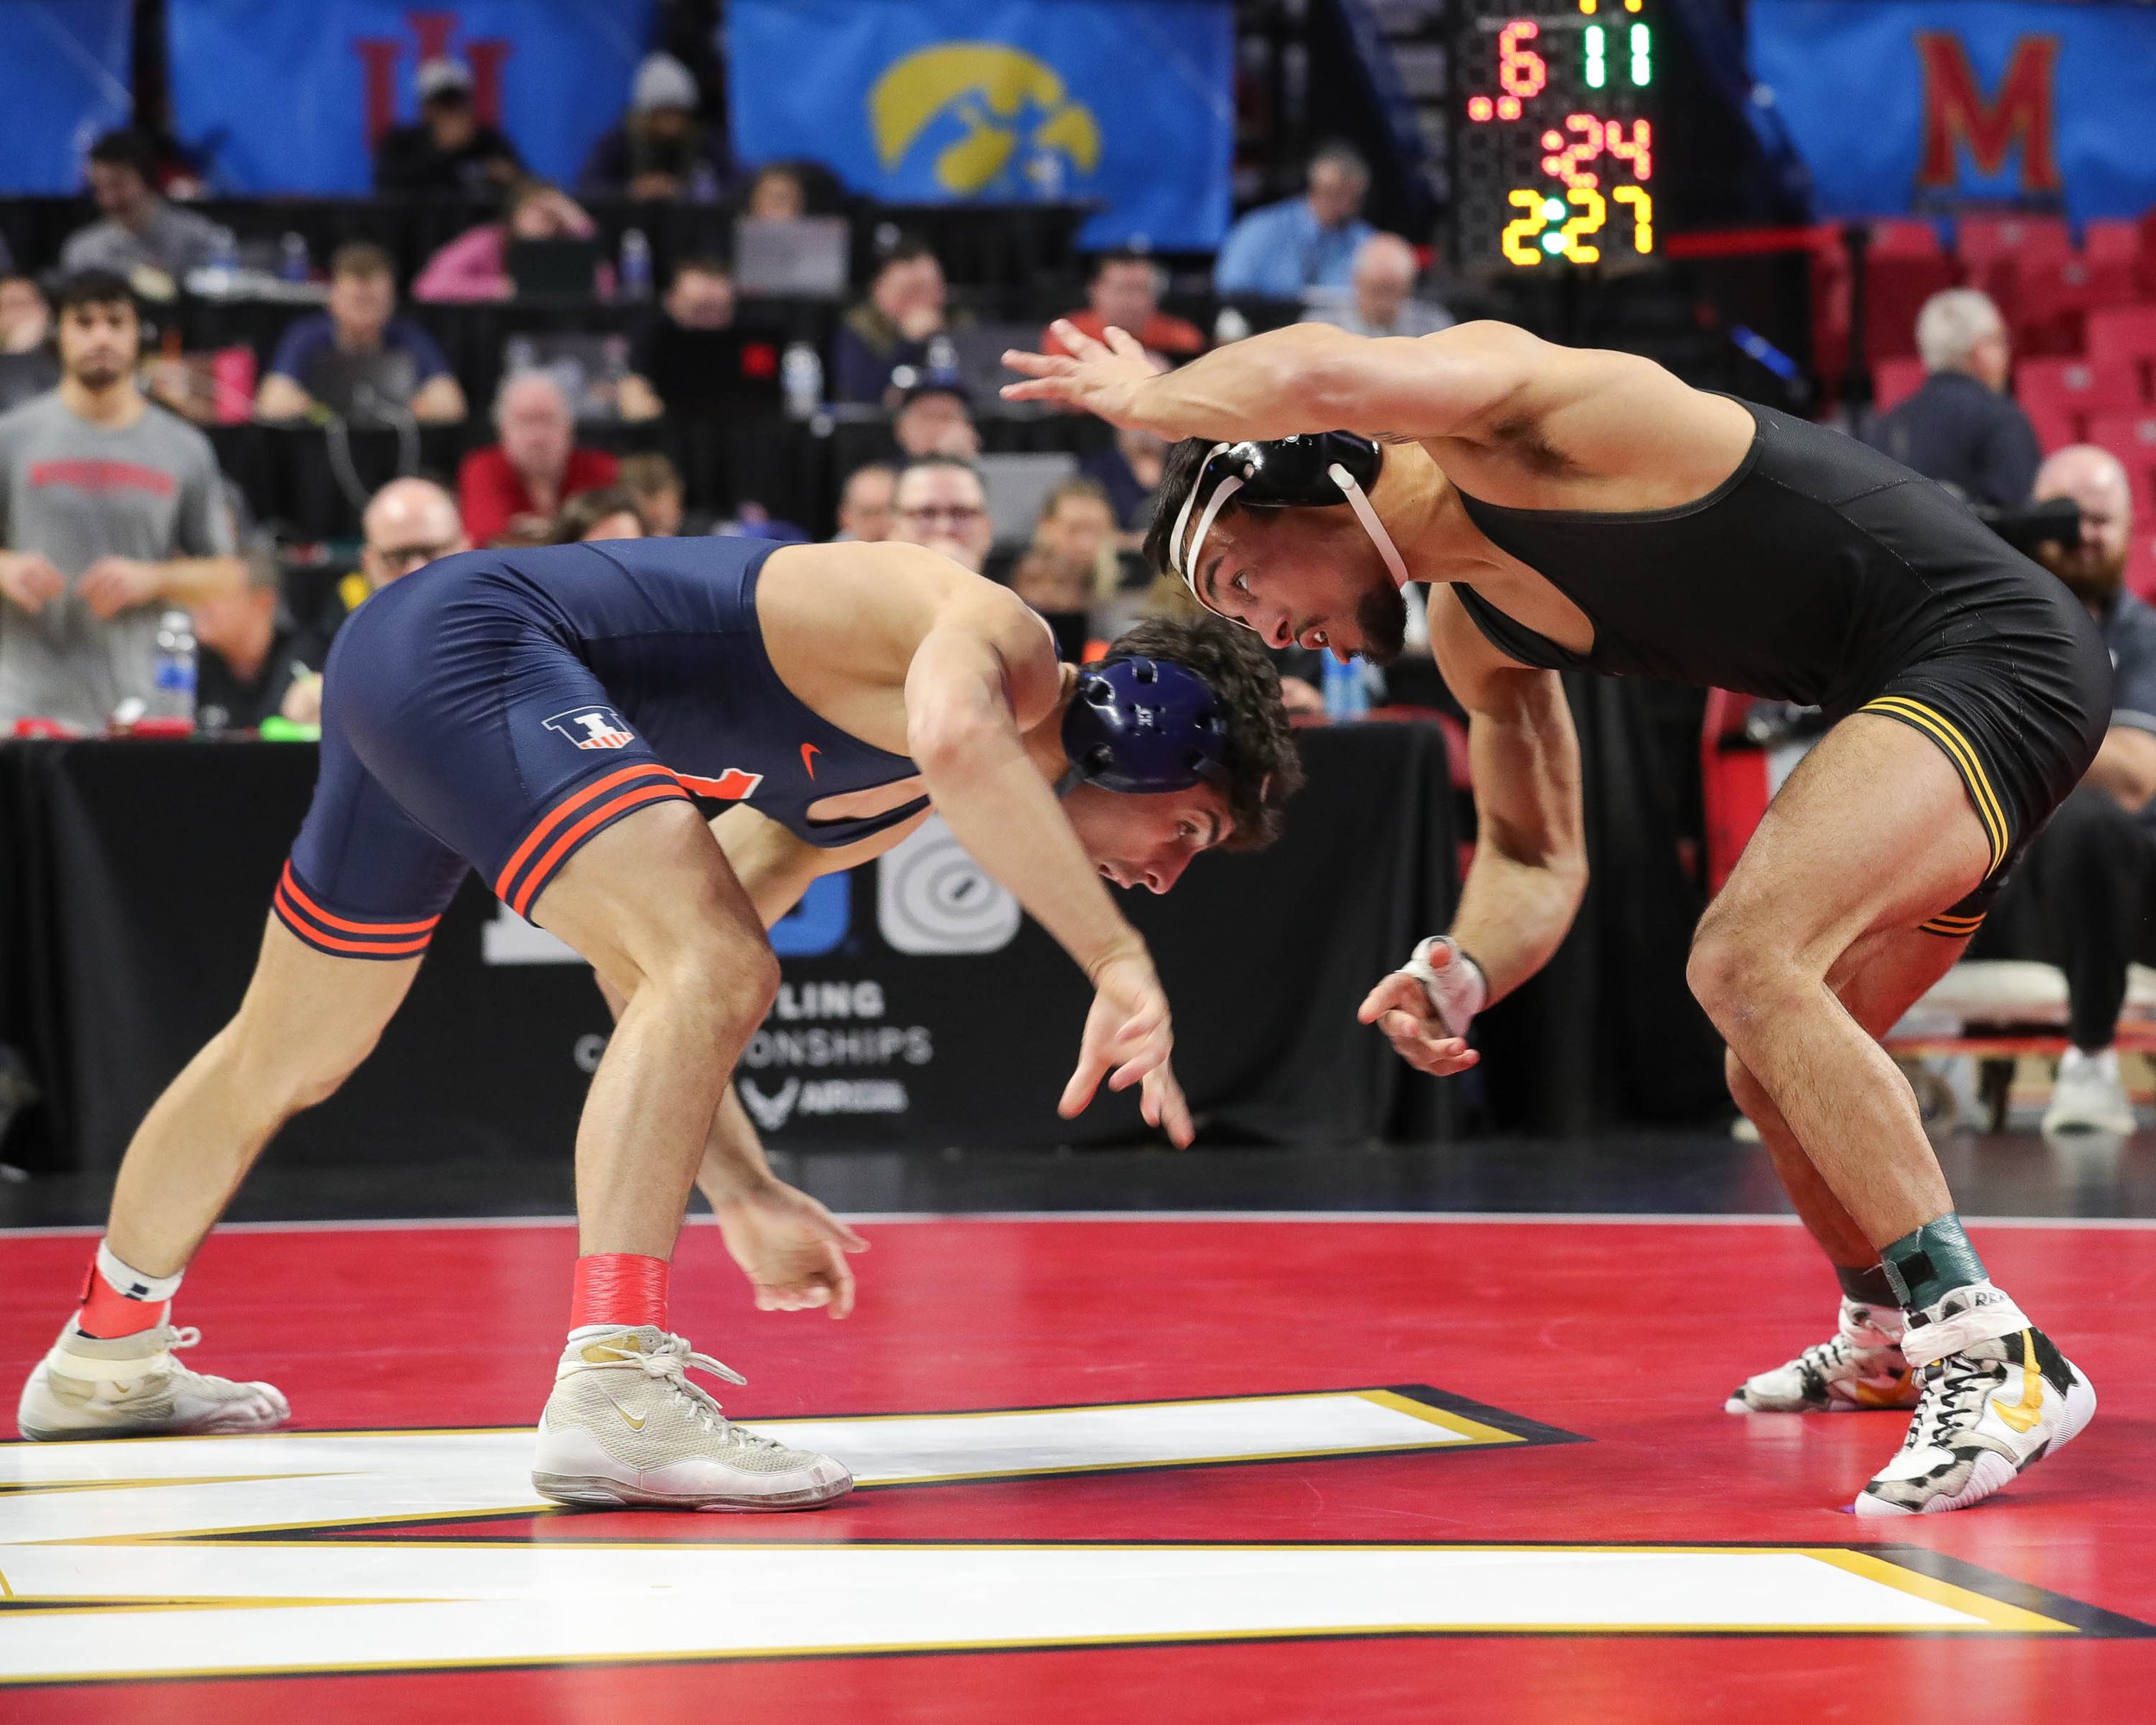  Iowa wrestler Real Woods grapples with Illinois’ Danny Pucino in a 141-lb quarterfinals match during the Big Ten Wrestling Championships at the Xfinity Center in College Park, Maryland on Saturday, March 9, 2023. Woods won 13-9. (David Harmantas/For